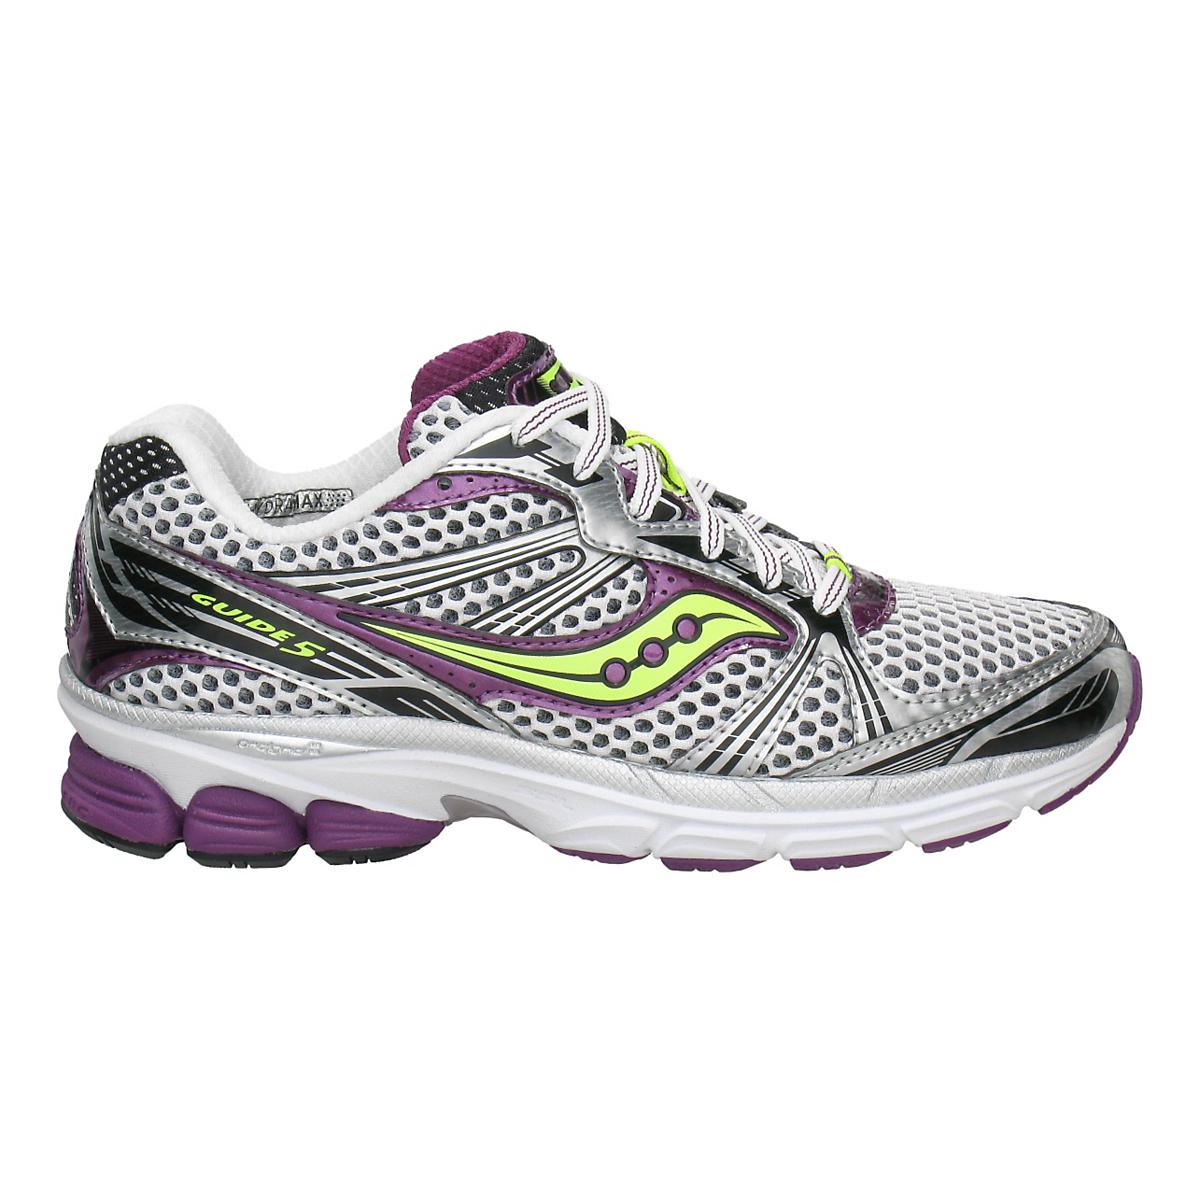 Womens Saucony ProGrid Guide 5 Running Shoe at Road Runner Sports